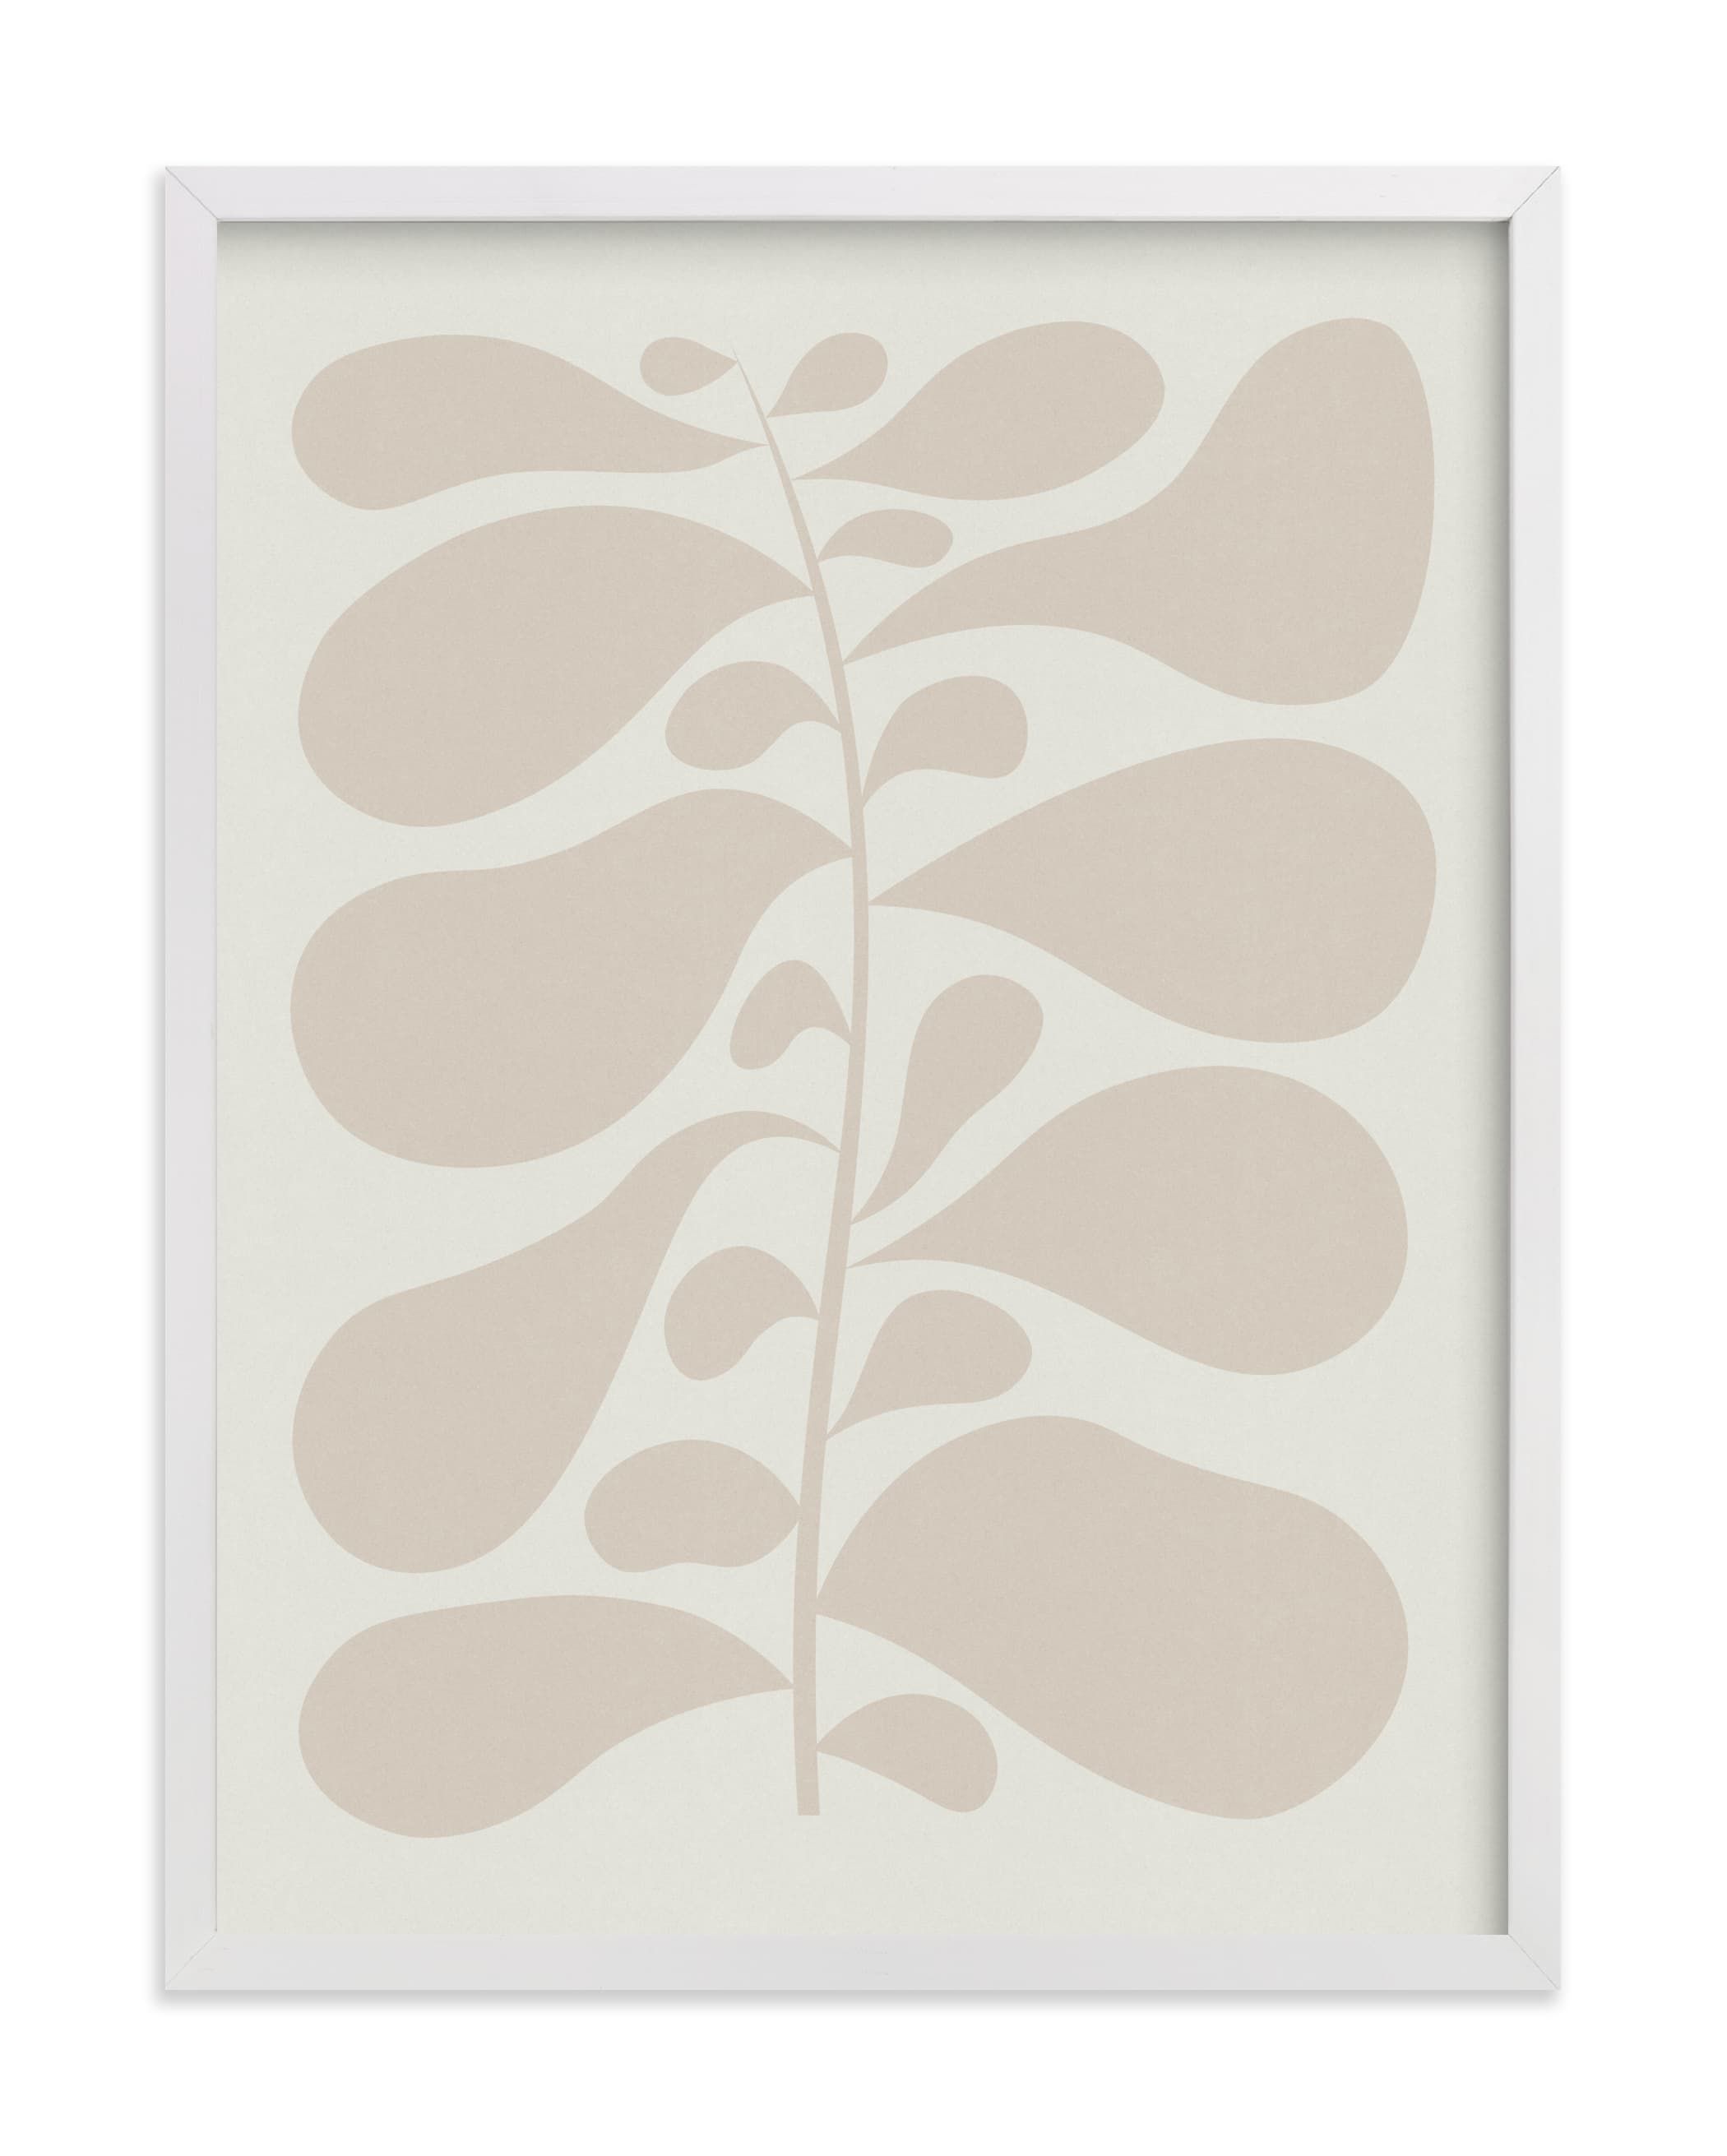 "Black Plant II" - Graphic Limited Edition Art Print by Alisa Galitsyna. | Minted